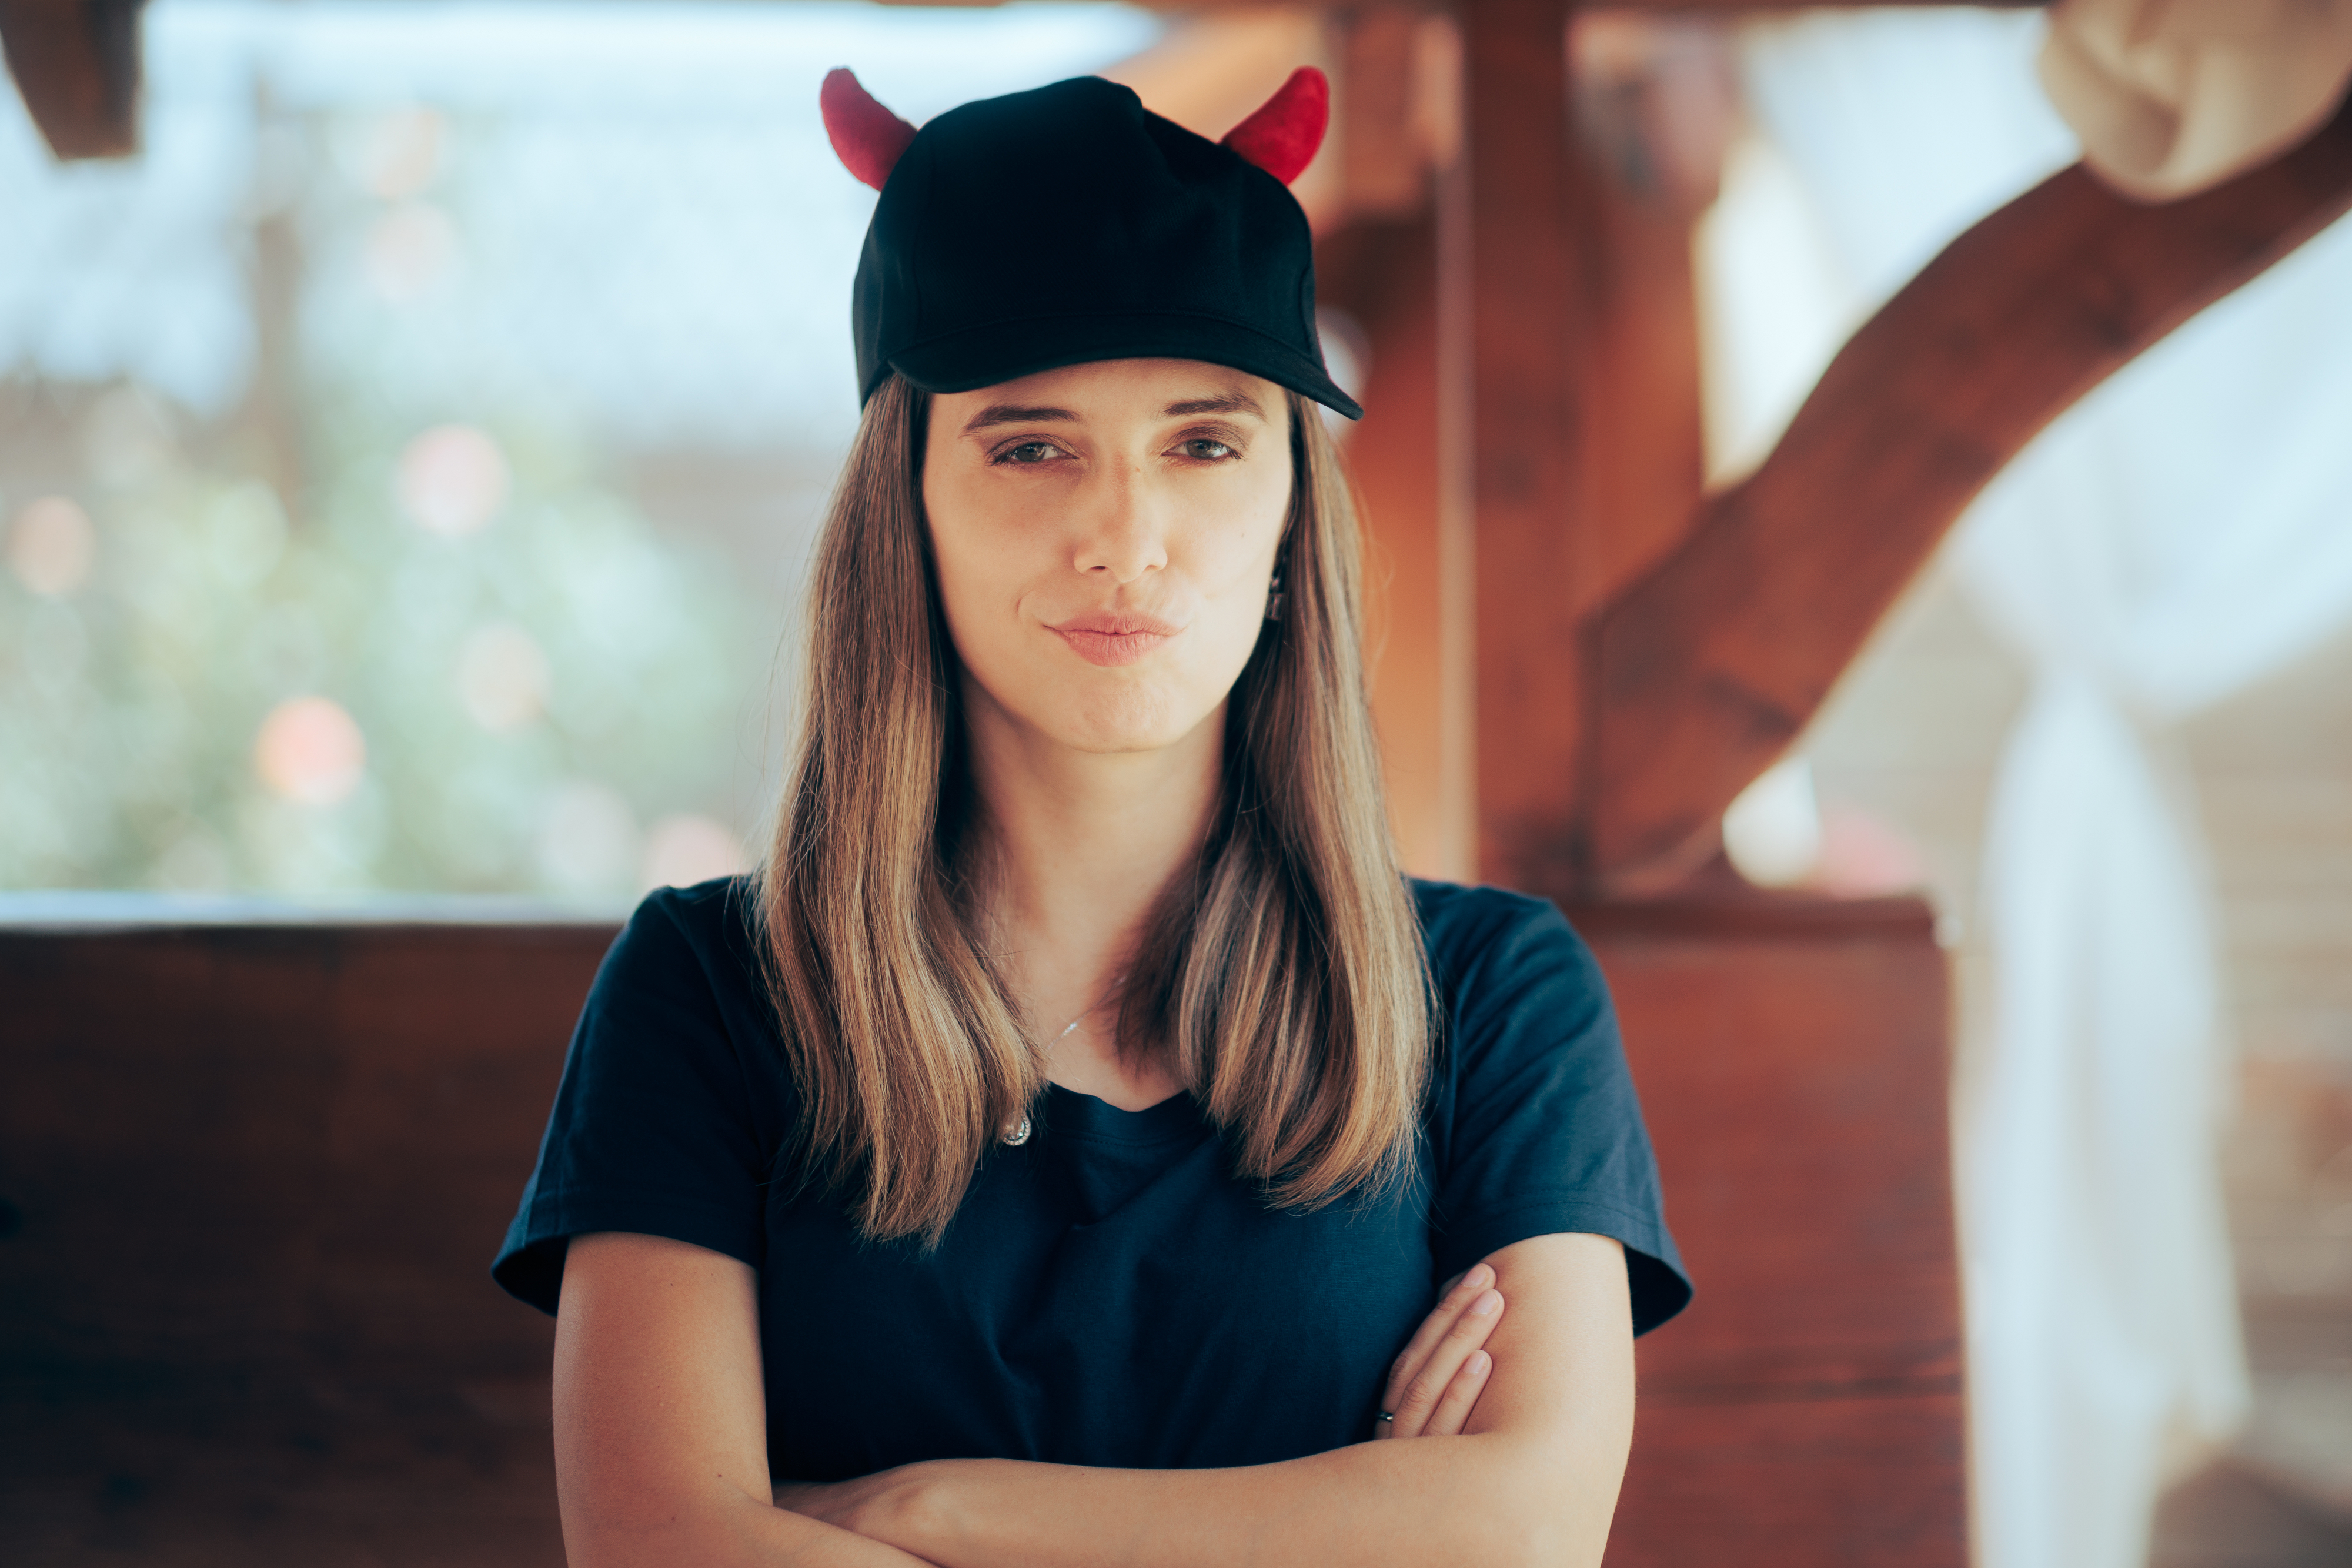 A woman with a hat that has devil horns and her arms crossed